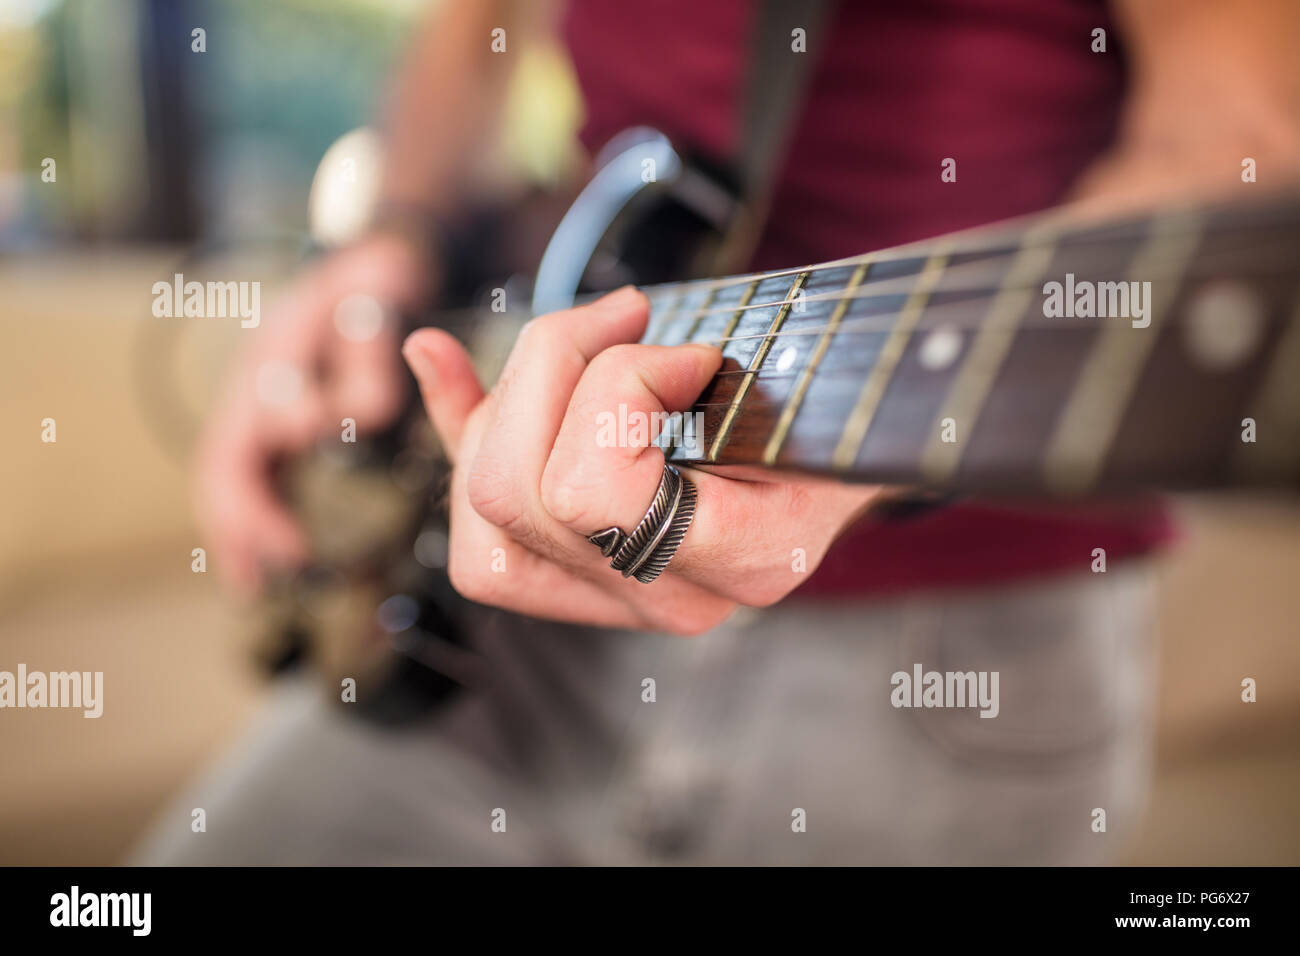 Close-up of man's hand playing electric guitar Stock Photo